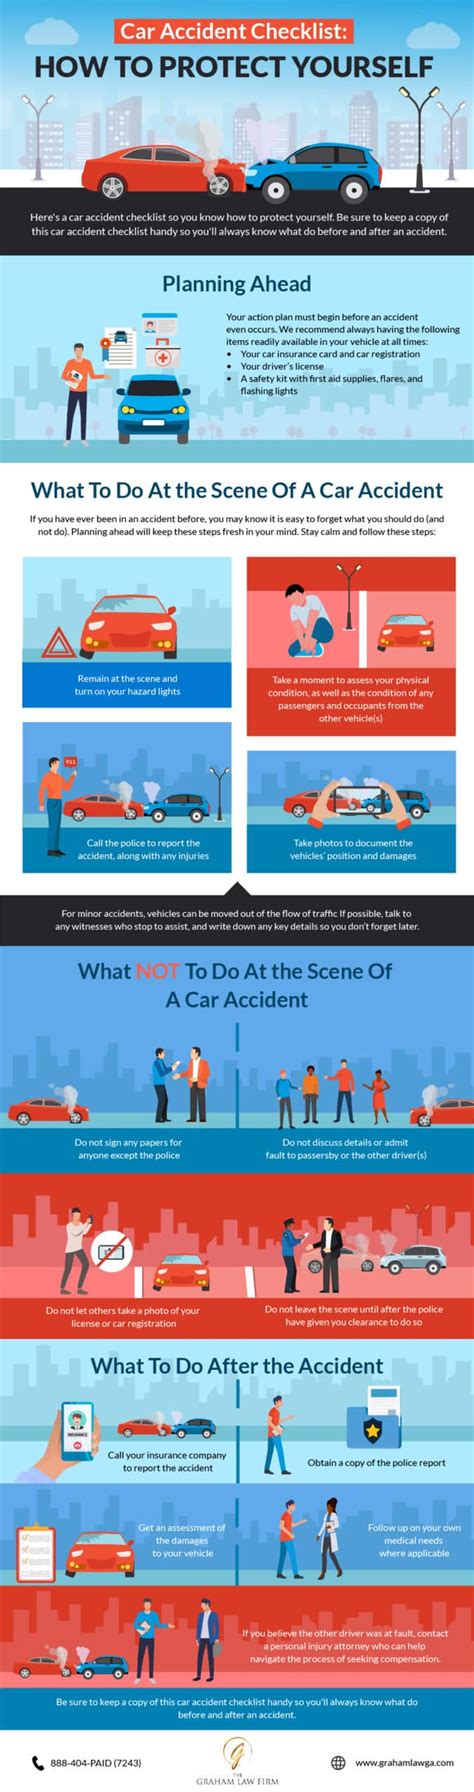 Car Accident Checklist How To Protect Yourself Infographic